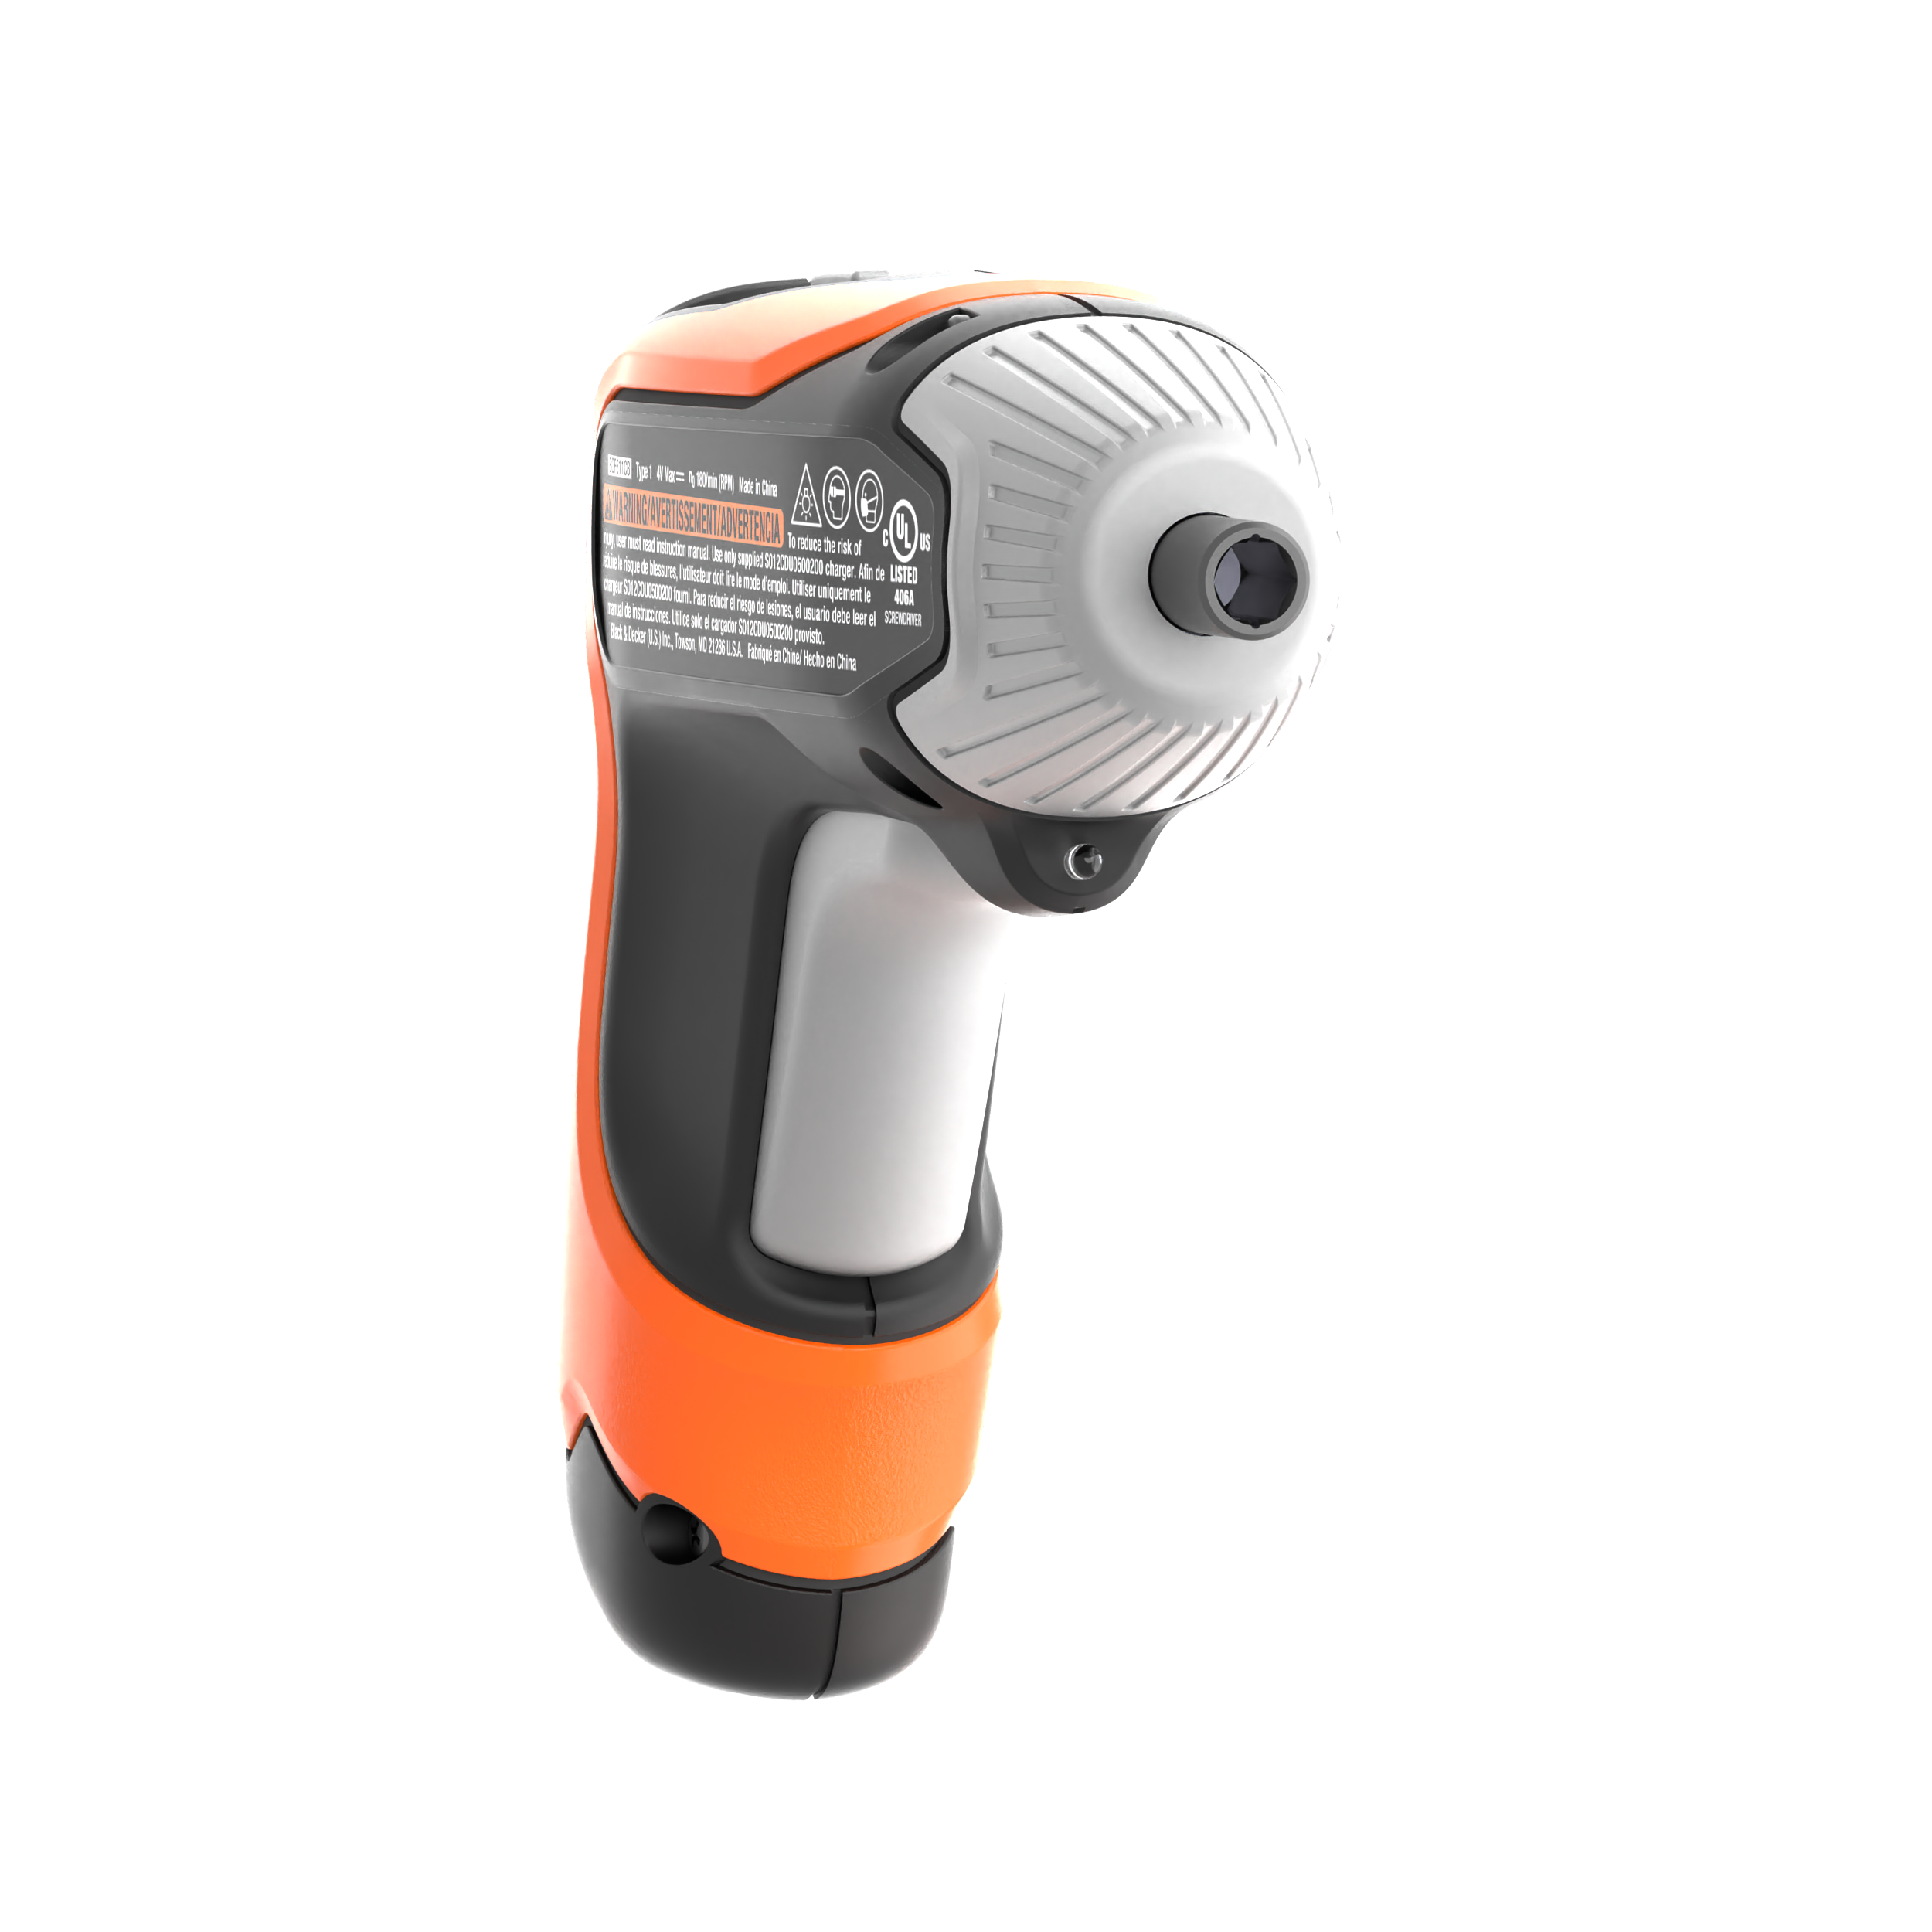 4V Max* Cordless Screwdriver With 1-Inch Screwdriver Bits